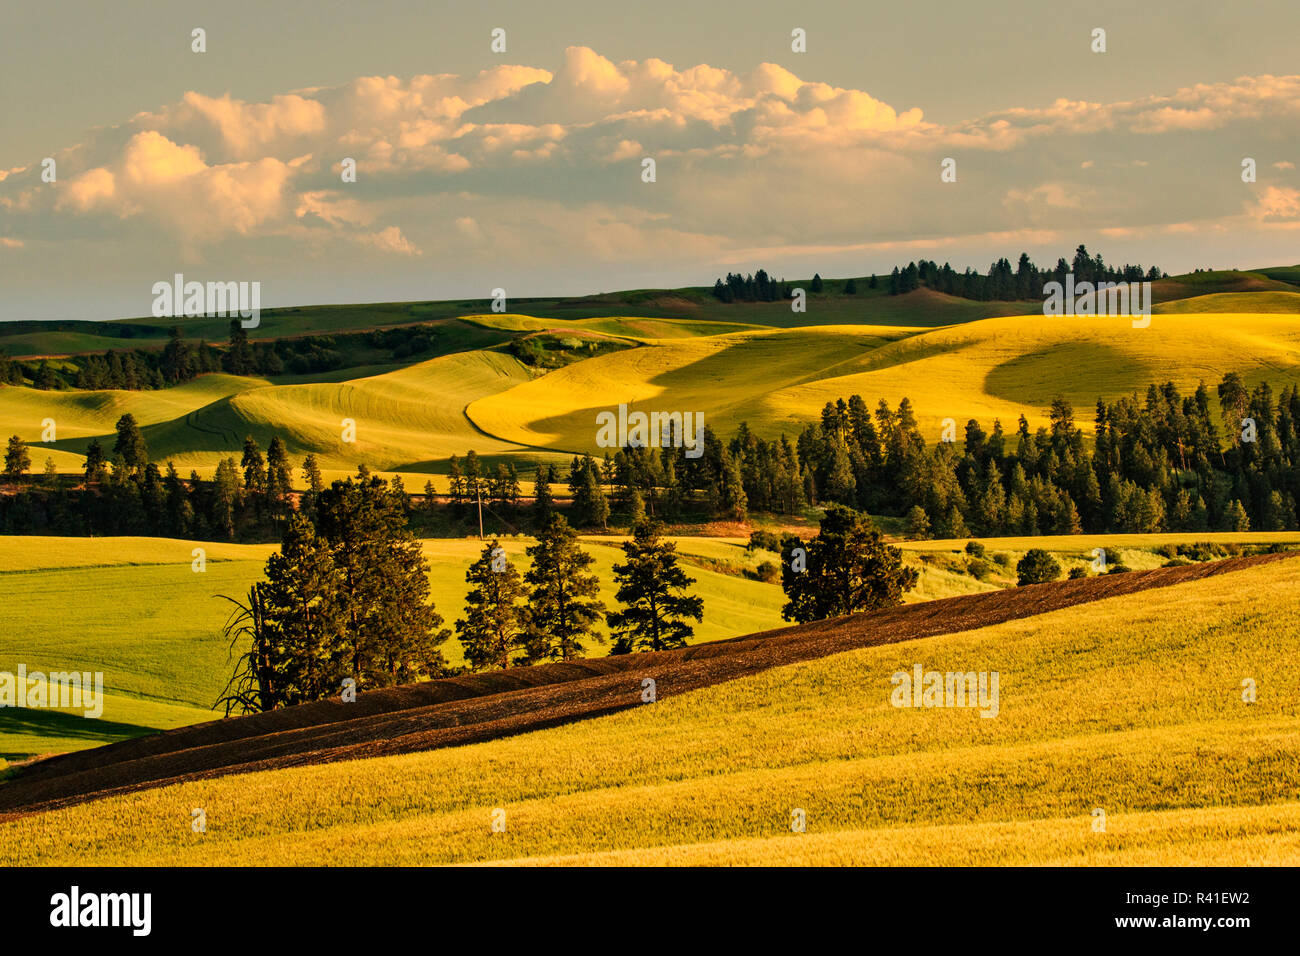 Rolling hills of wheat and canola crops in late afternoon light, Palouse region of Eastern Washington State. Stock Photo